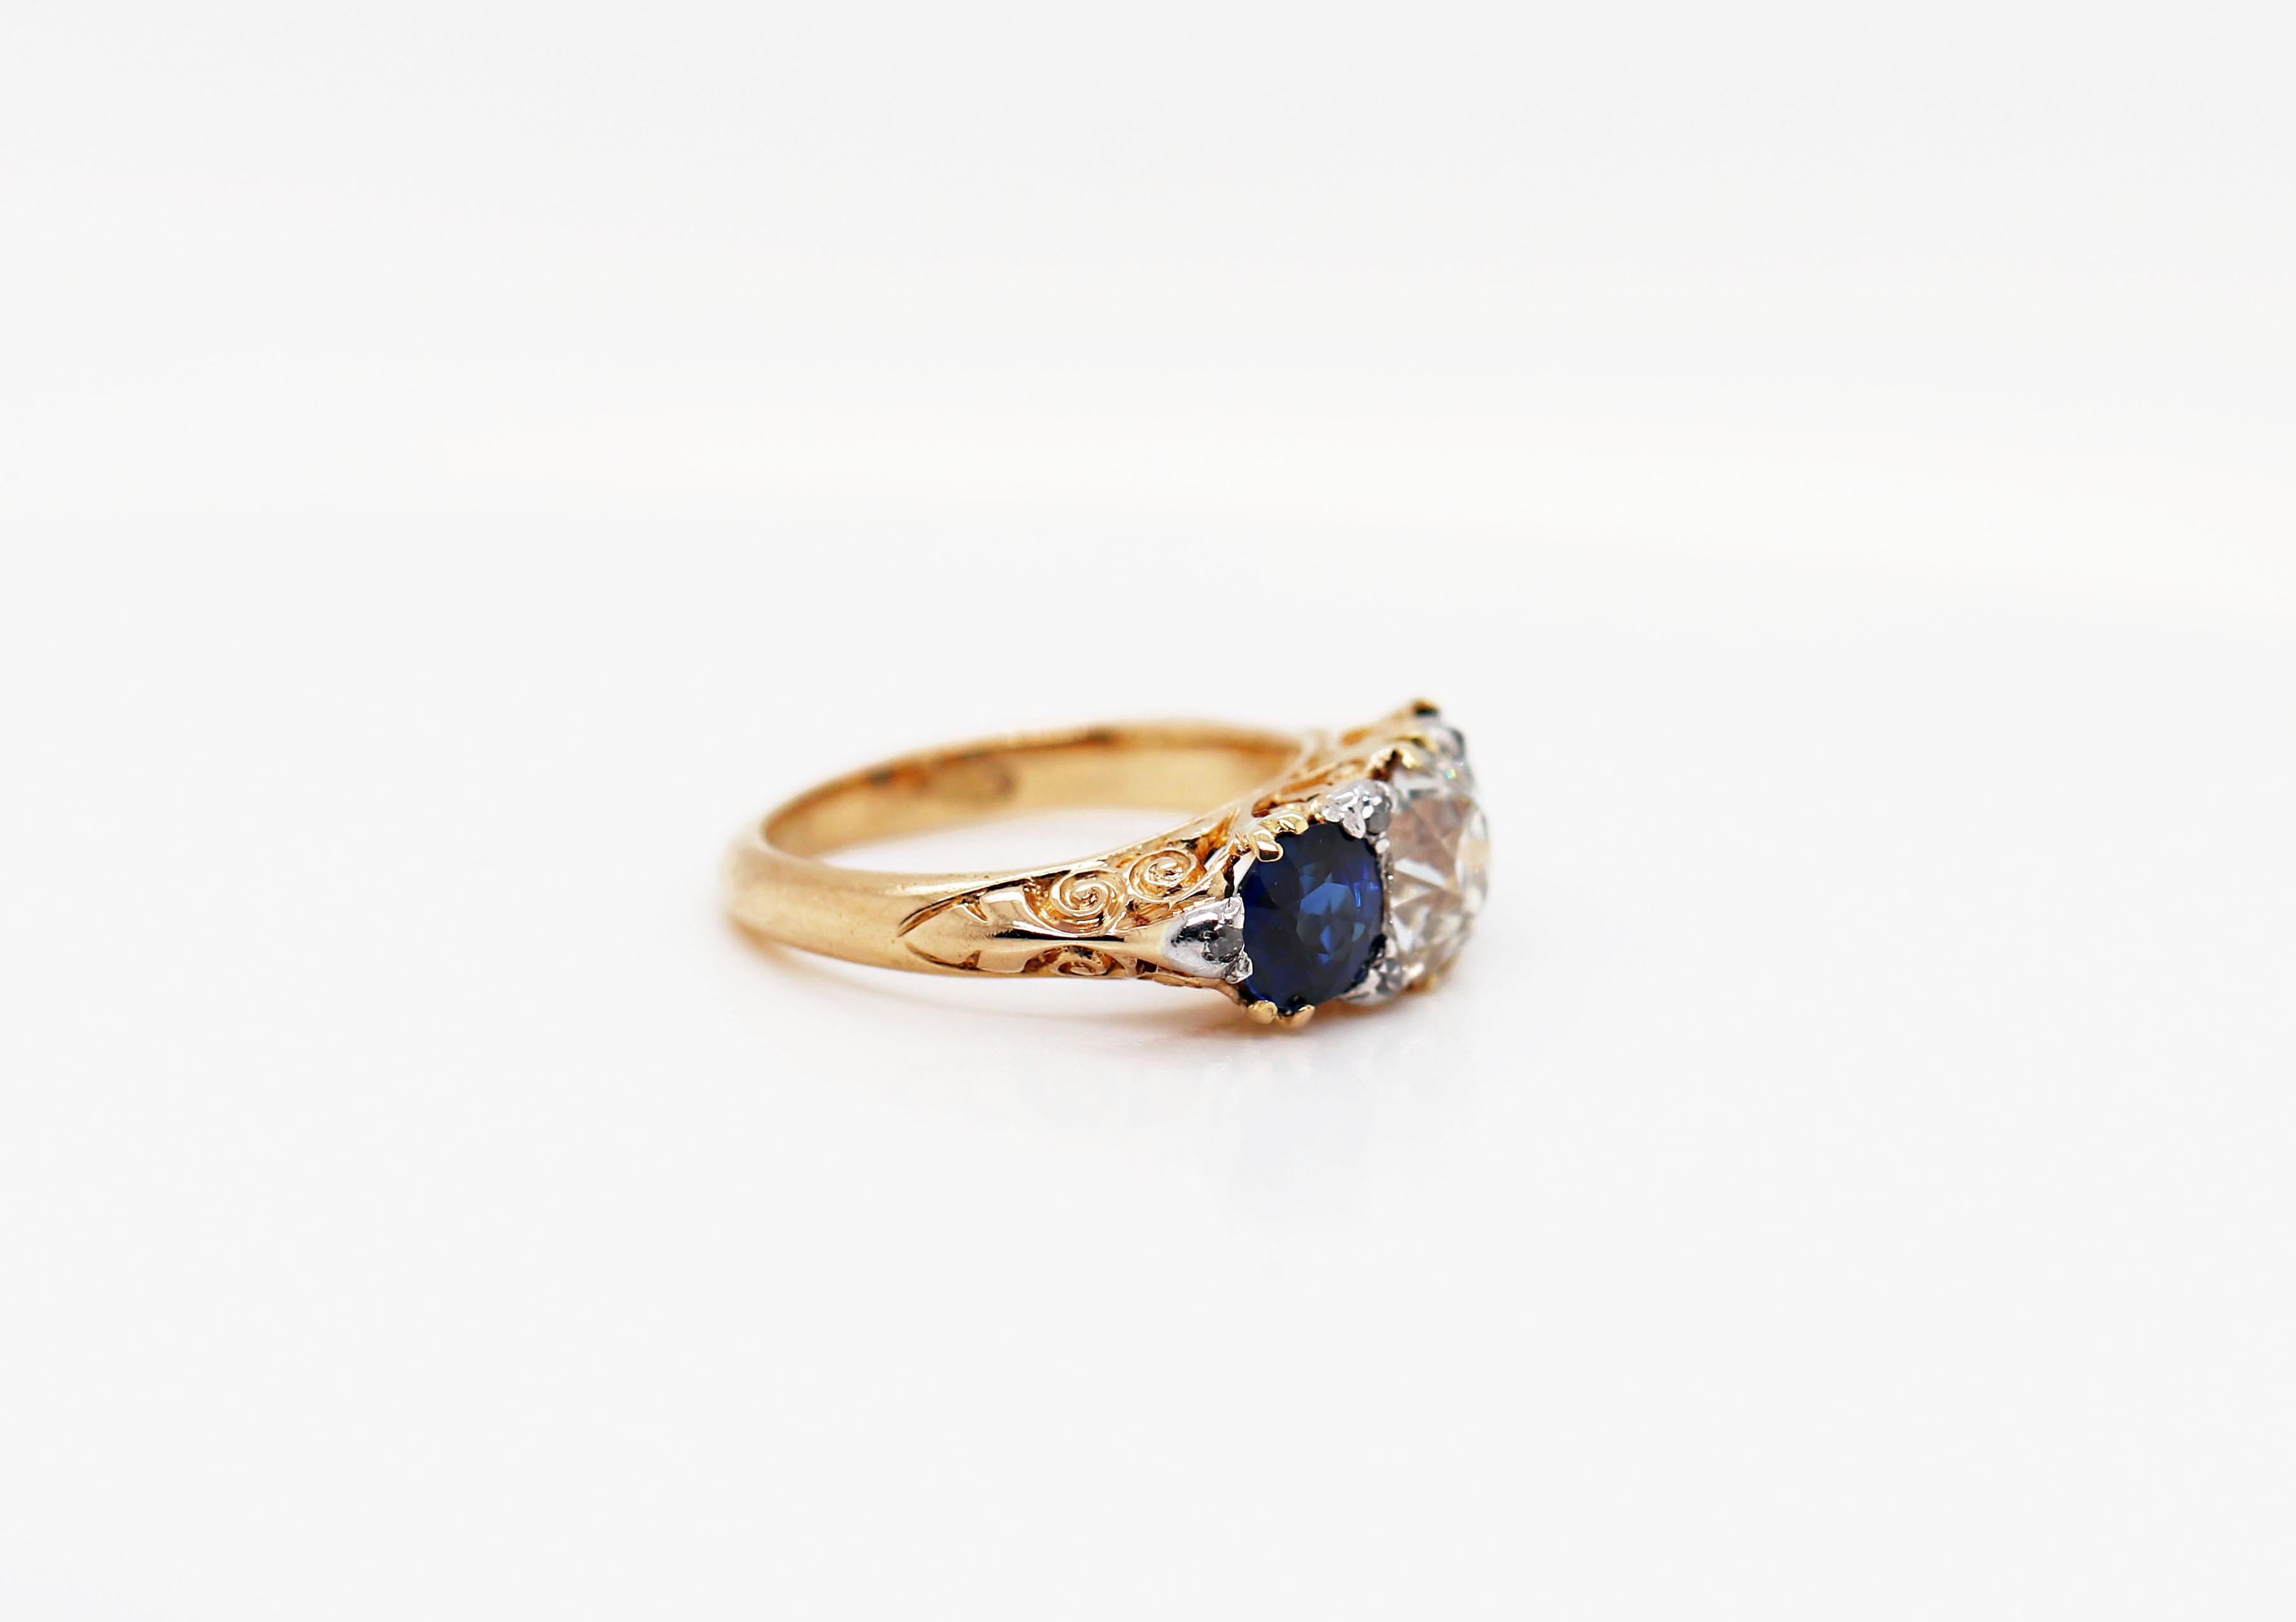 Hand carved Late Victorian three stone ring set with a 1.41ct old cut diamond and two beautiful blue sapphires on either side with a combined weight of 1.61ct all in open back, claw settings. The centre stone is decorated with four old cut diamonds